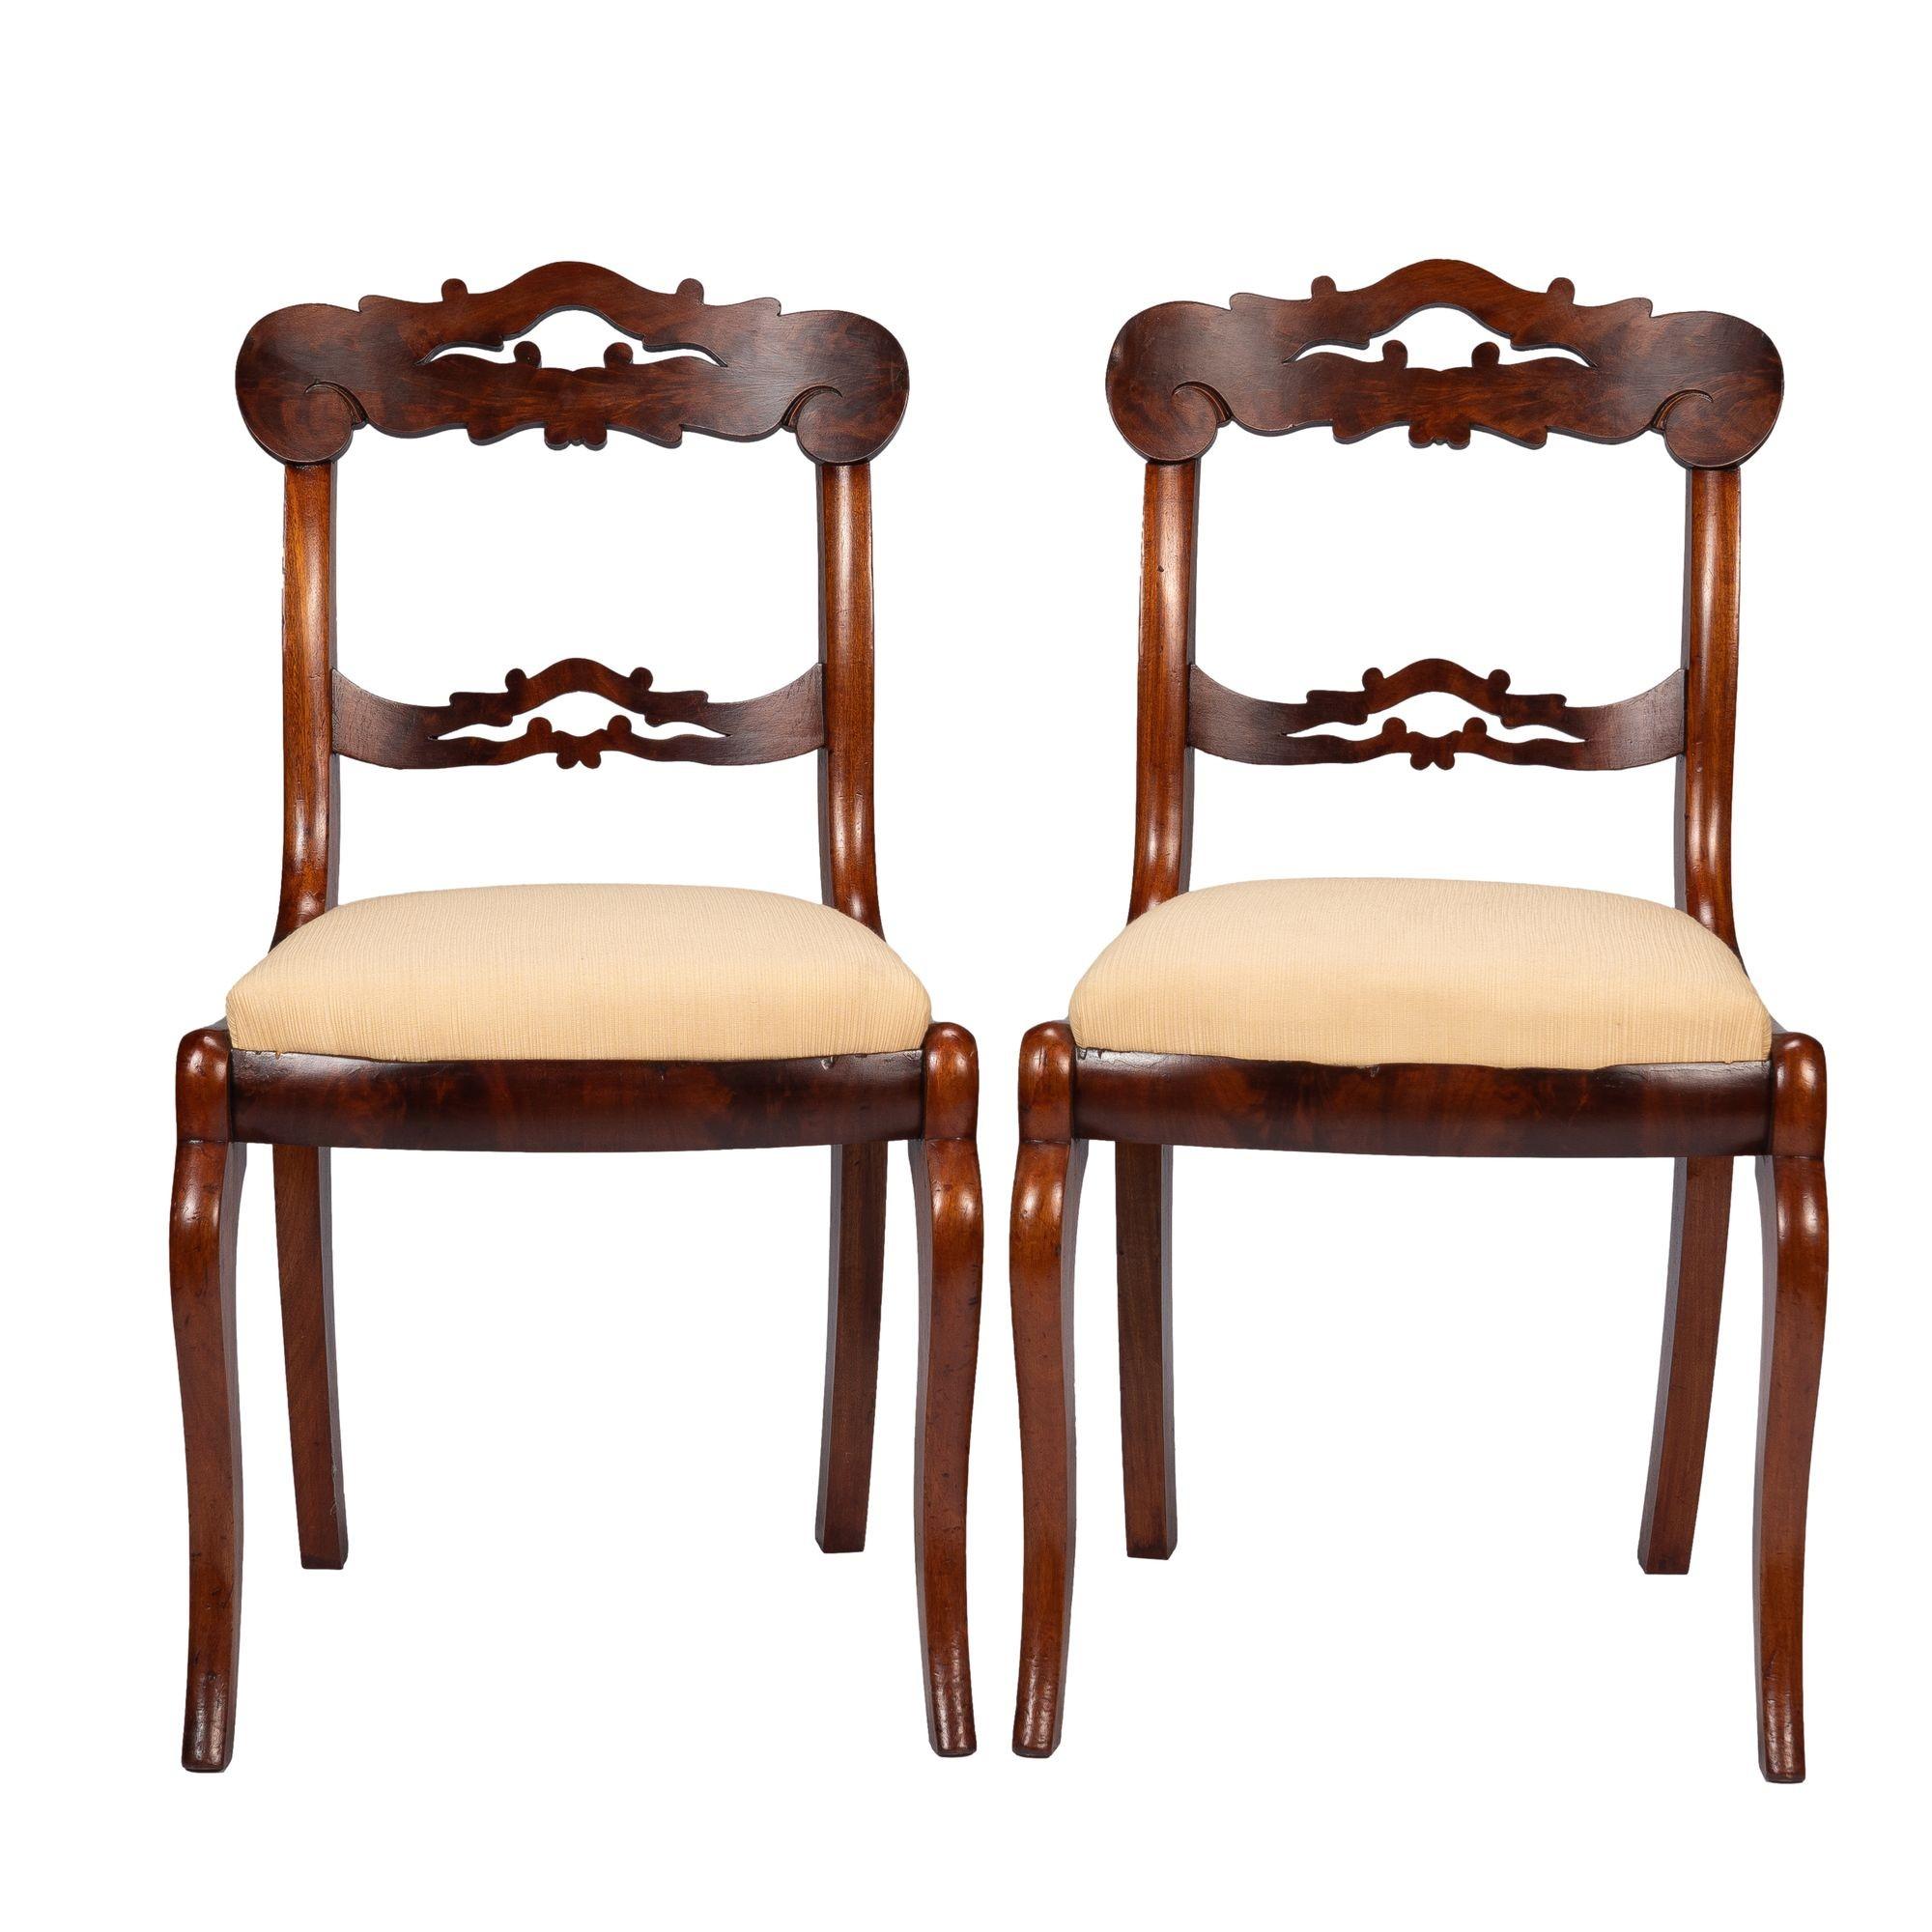 Pair of American mahogany and figured mahogany veneered late Classical upholstered slip seat side chairs. The chairs feature a shaped & pierced crest rail and back rail. Chestnut secondary wood.

American, Boston, circa 1830-45.

Dimensions: 18” W x